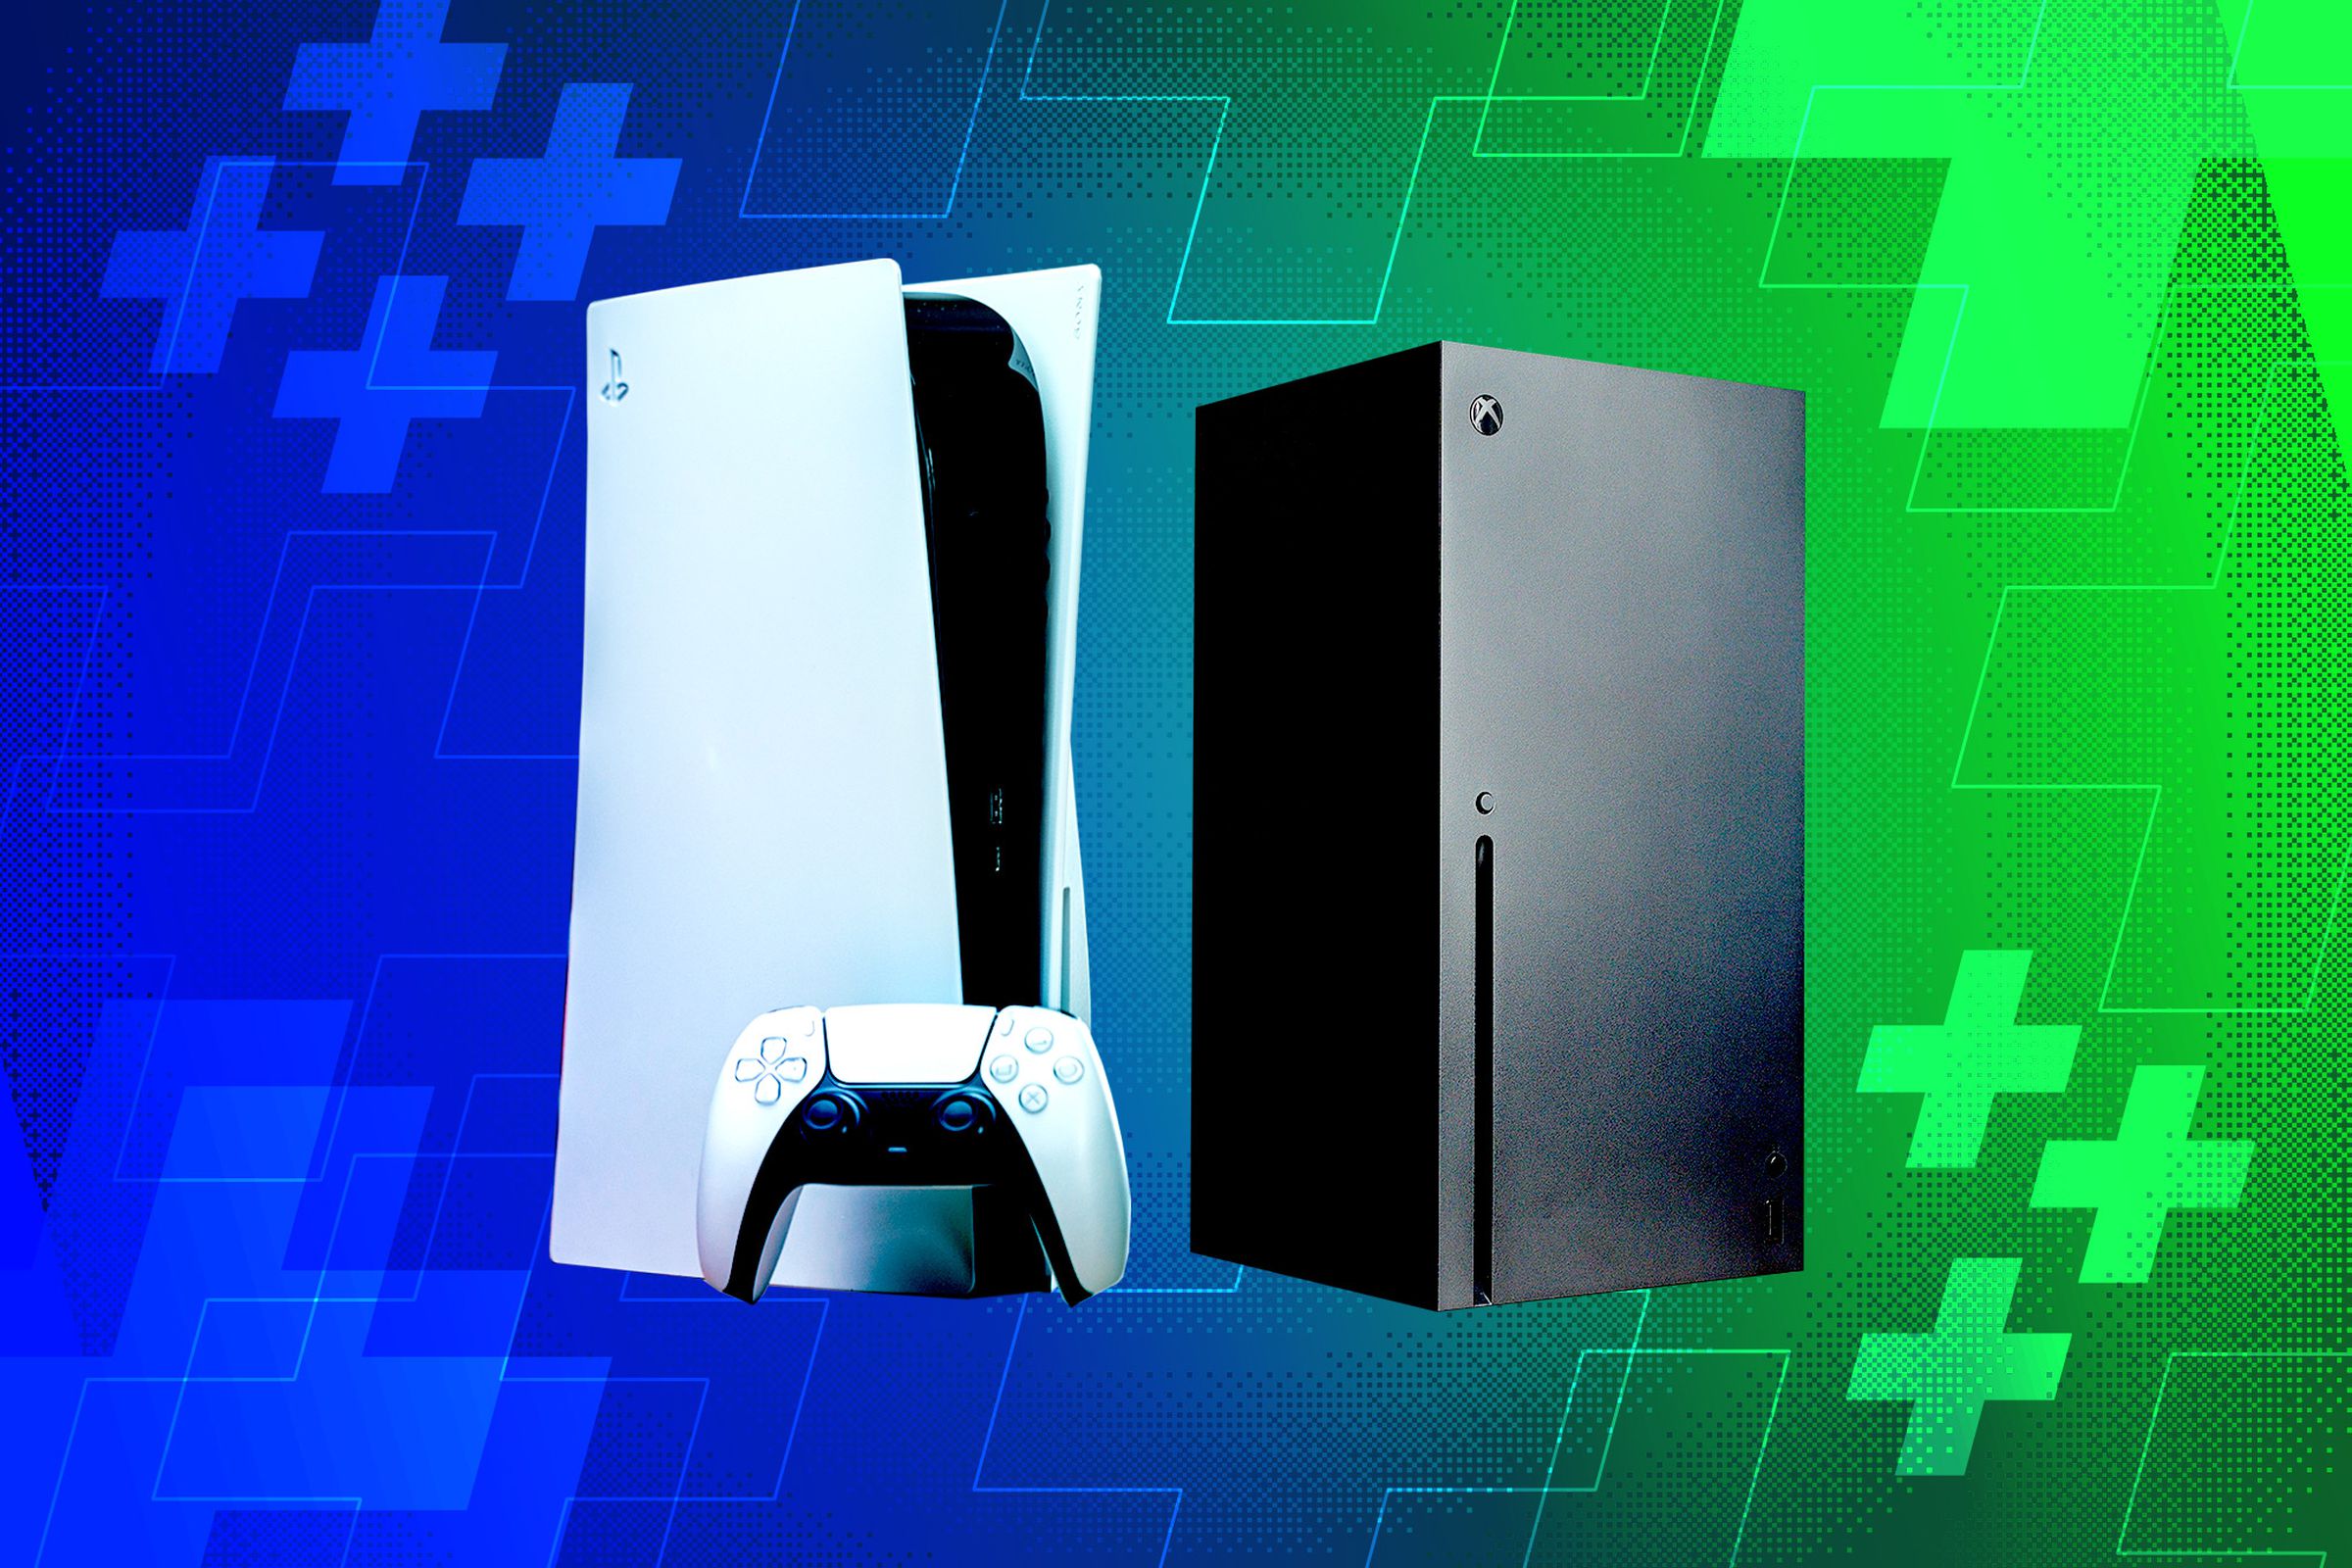 An illustration of the PlayStation 5 and Xbox Series X consoles on a blue and green background.